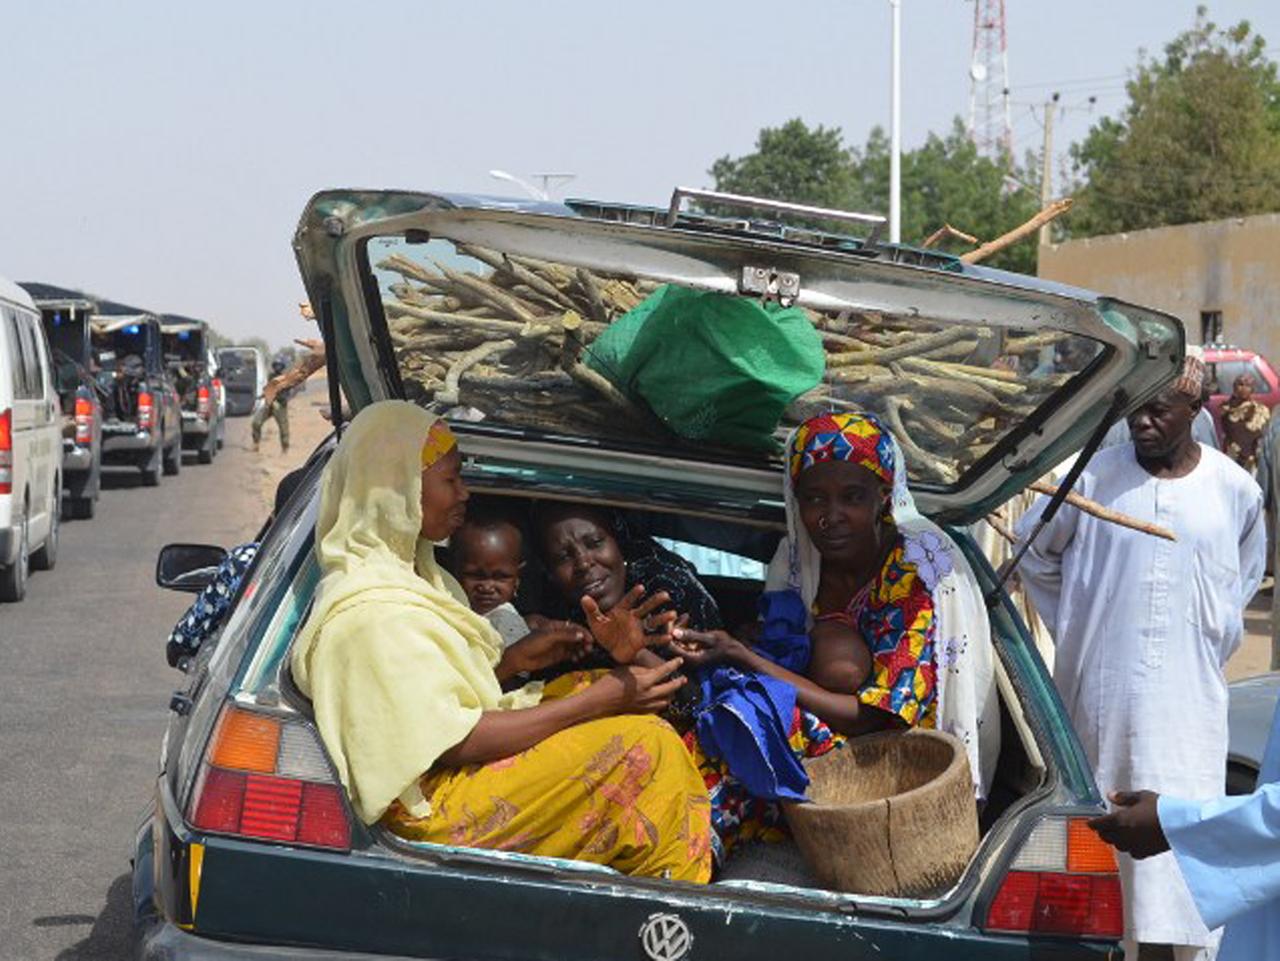 Women and children gather into a car's trunk as villagers flee the village of Jakana, outside Maiduguri, Borno State, Nigeria